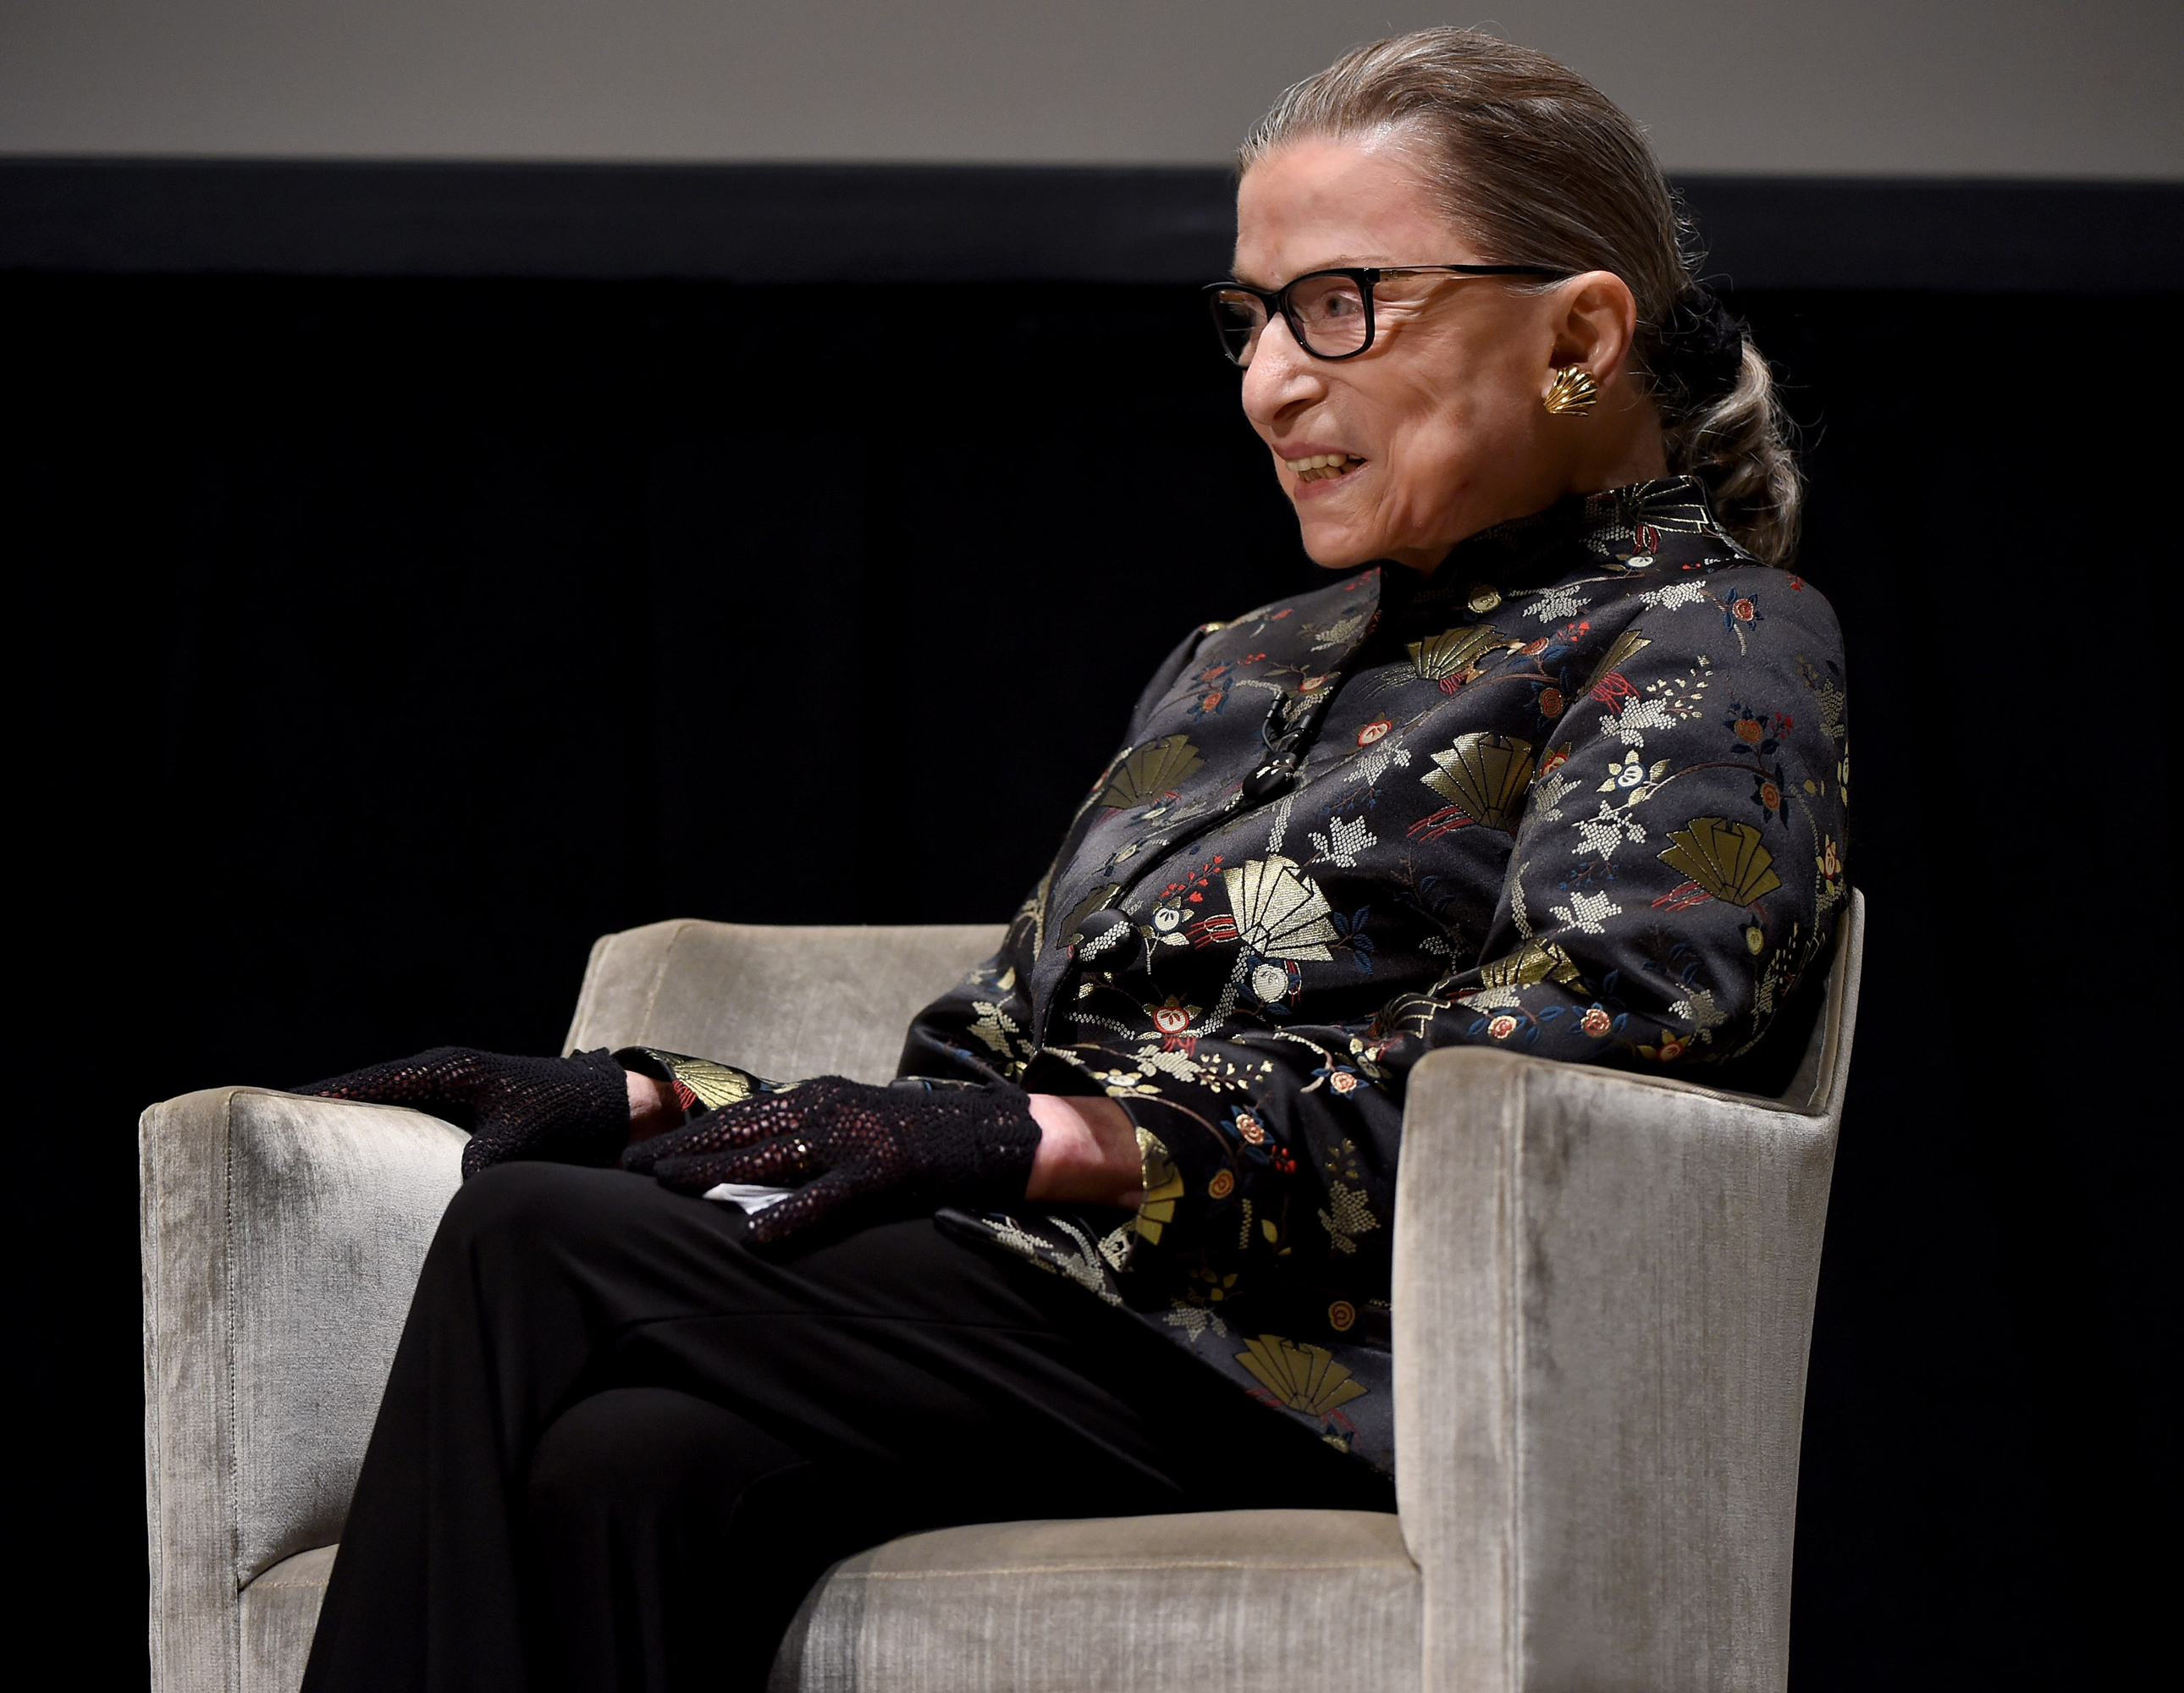 NEW YORK, NY - SEPTEMBER 21:  Supreme Court Justice Ruth Bader Ginsburg presents onstage at An Historic Evening with Supreme Court Justice Ruth Bader Ginsburg at the Temple Emanu-El Skirball Center on September 21, 2016 in New York City.  (Photo by Michael Kovac/Getty Images)